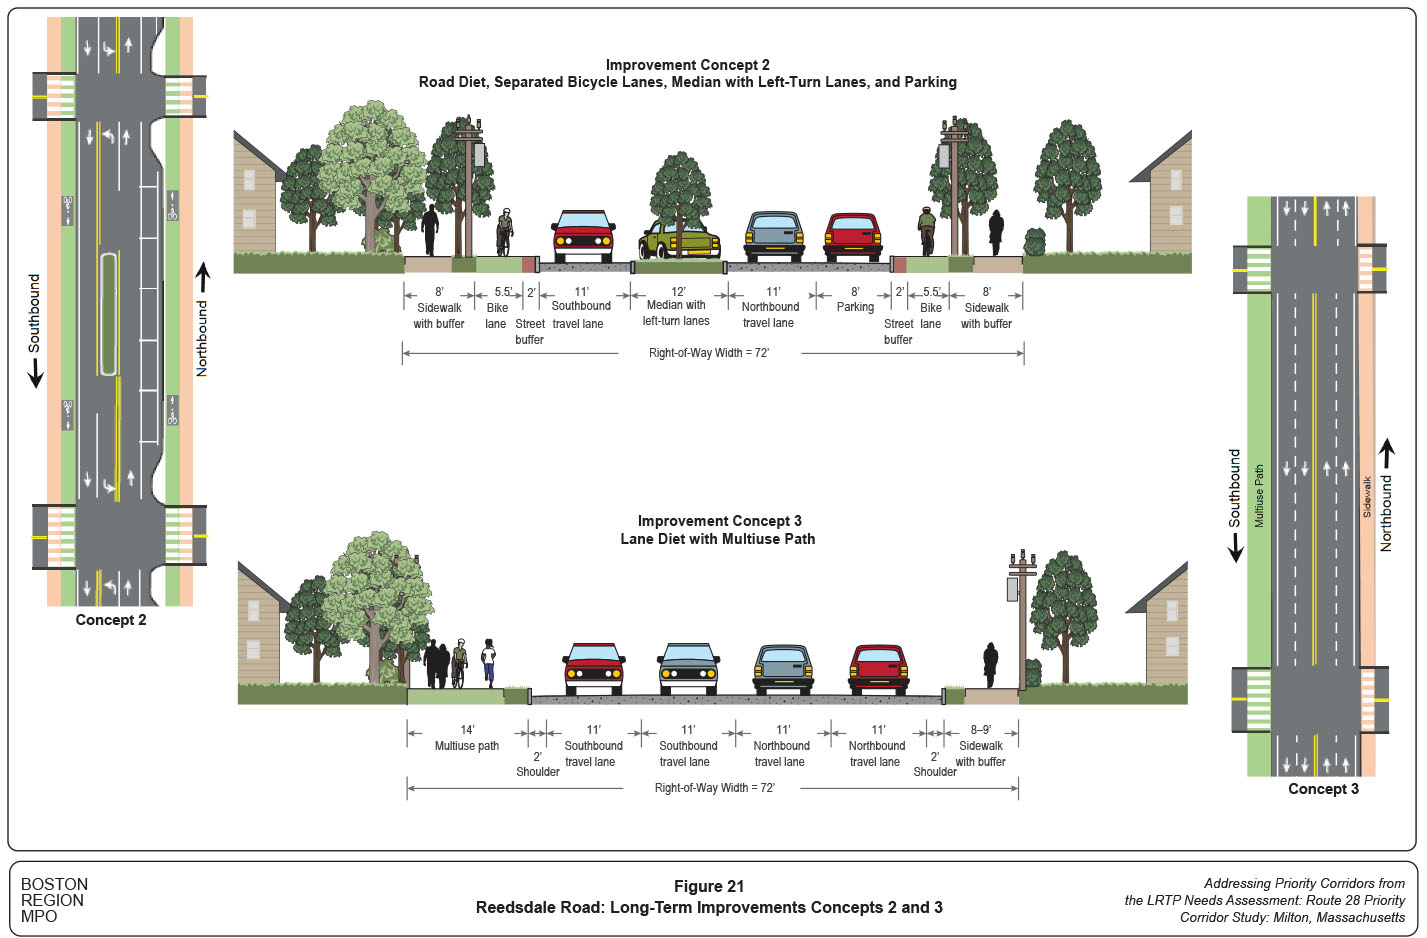 Figure 21
Reedsdale Road: Long-Term Improvements Concepts 2 and 3
Figure 21 shows the cross-sectional configuration of Reedsdale Road long-term improvements for Concepts 2 and 3.
